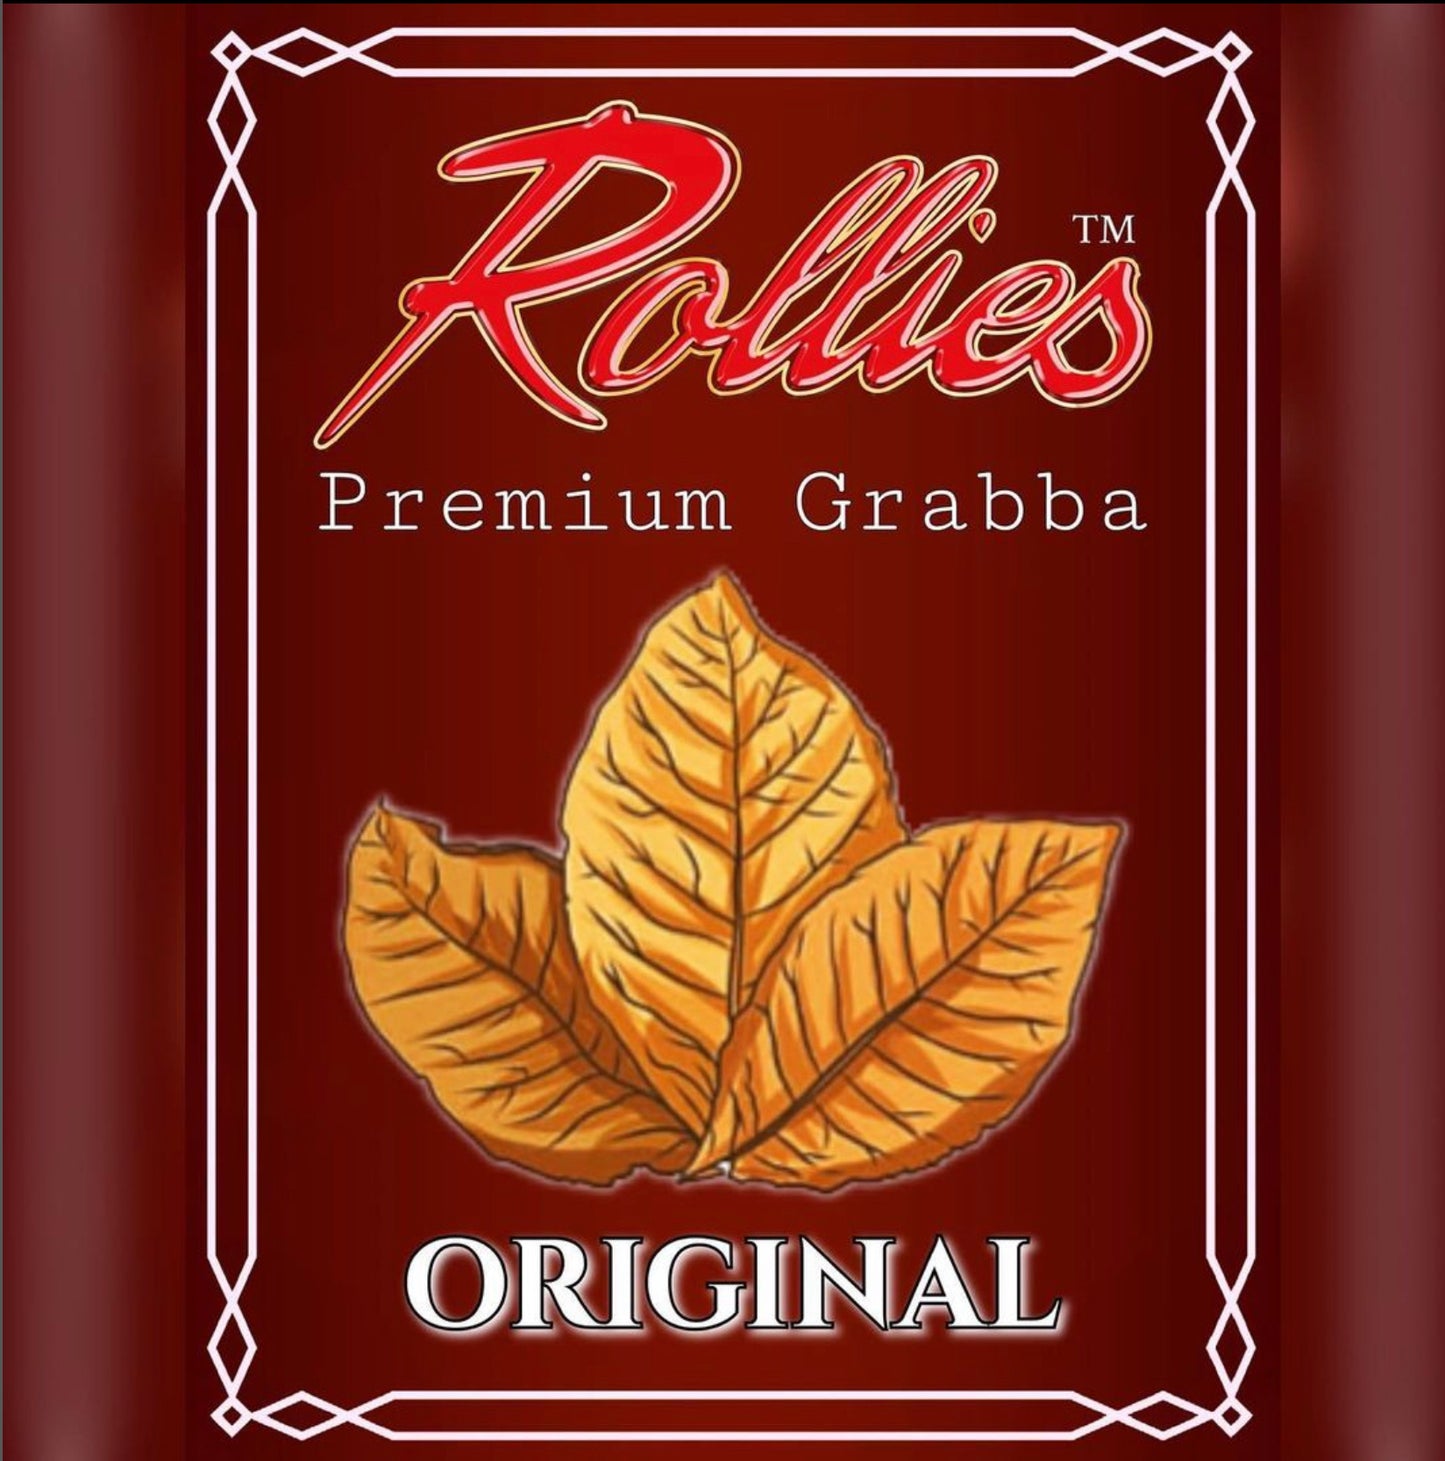 Rollies Grabba 100% Natural Premium Crushed Fronto Leaf